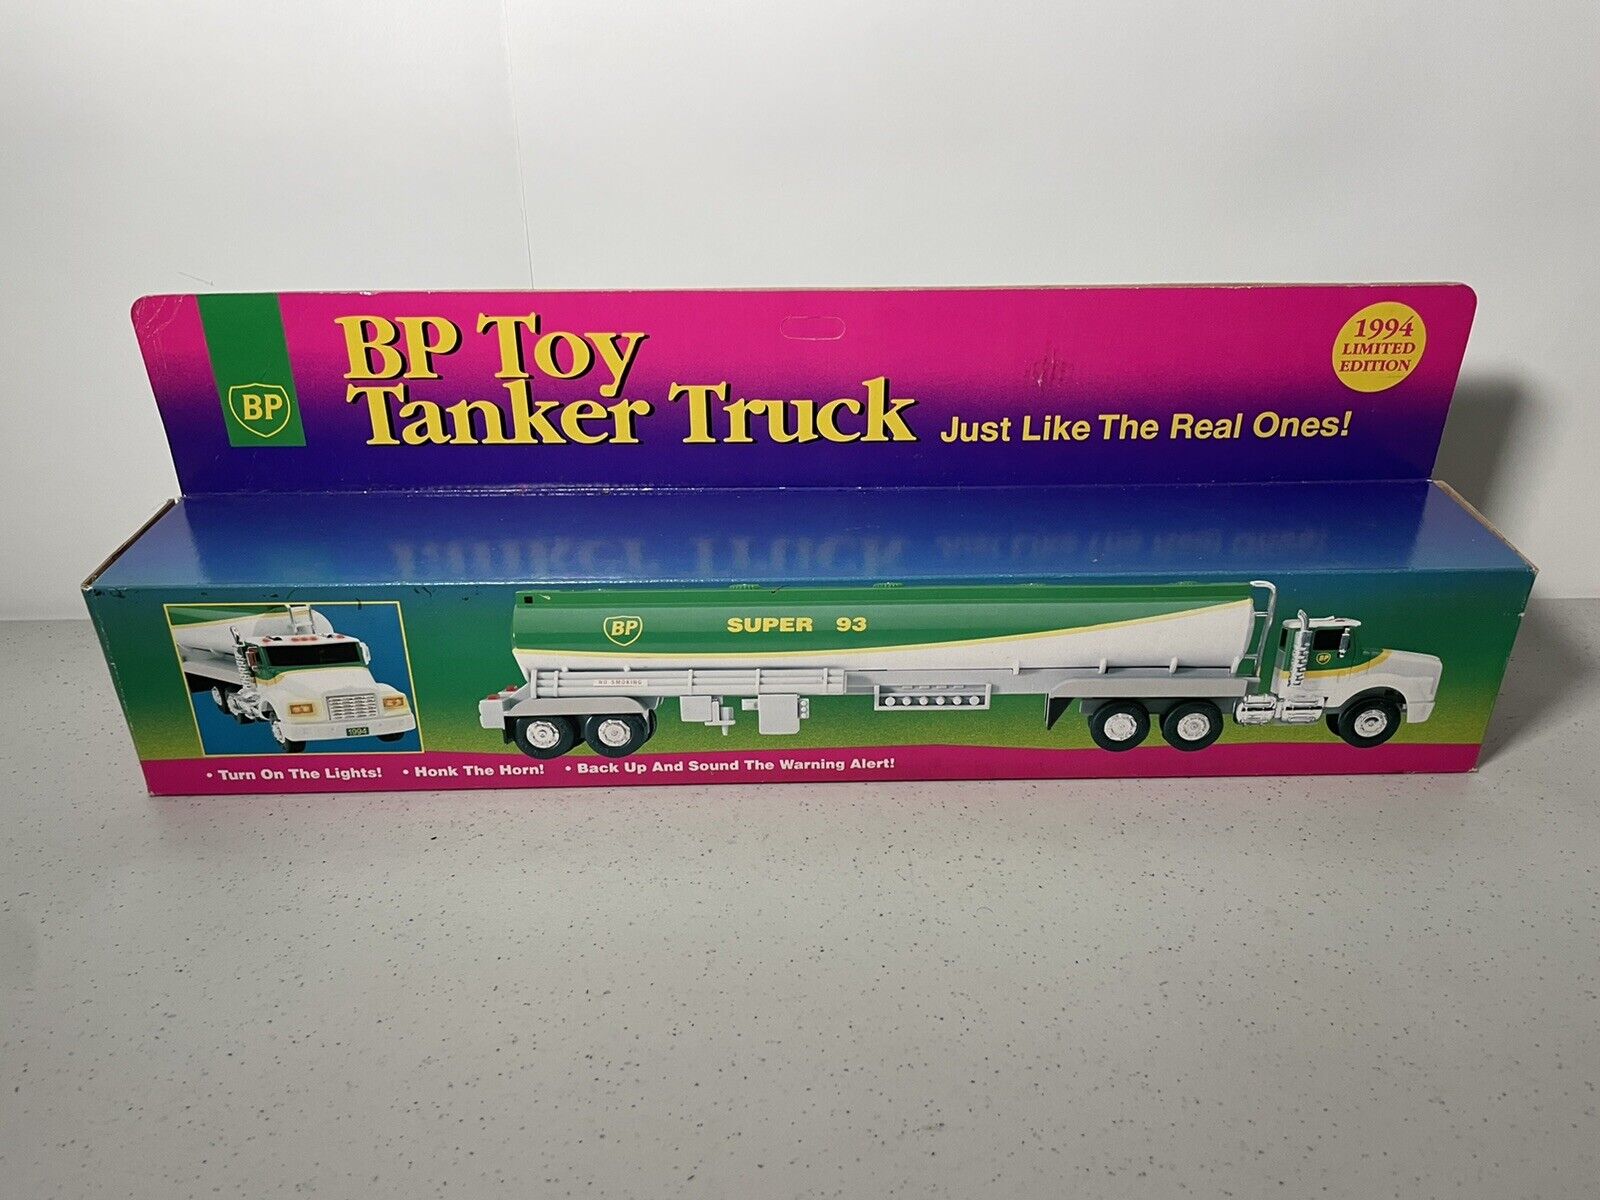 Limited Edition 1994 BP Toy Tanker Truck Super 93 (New In Box)